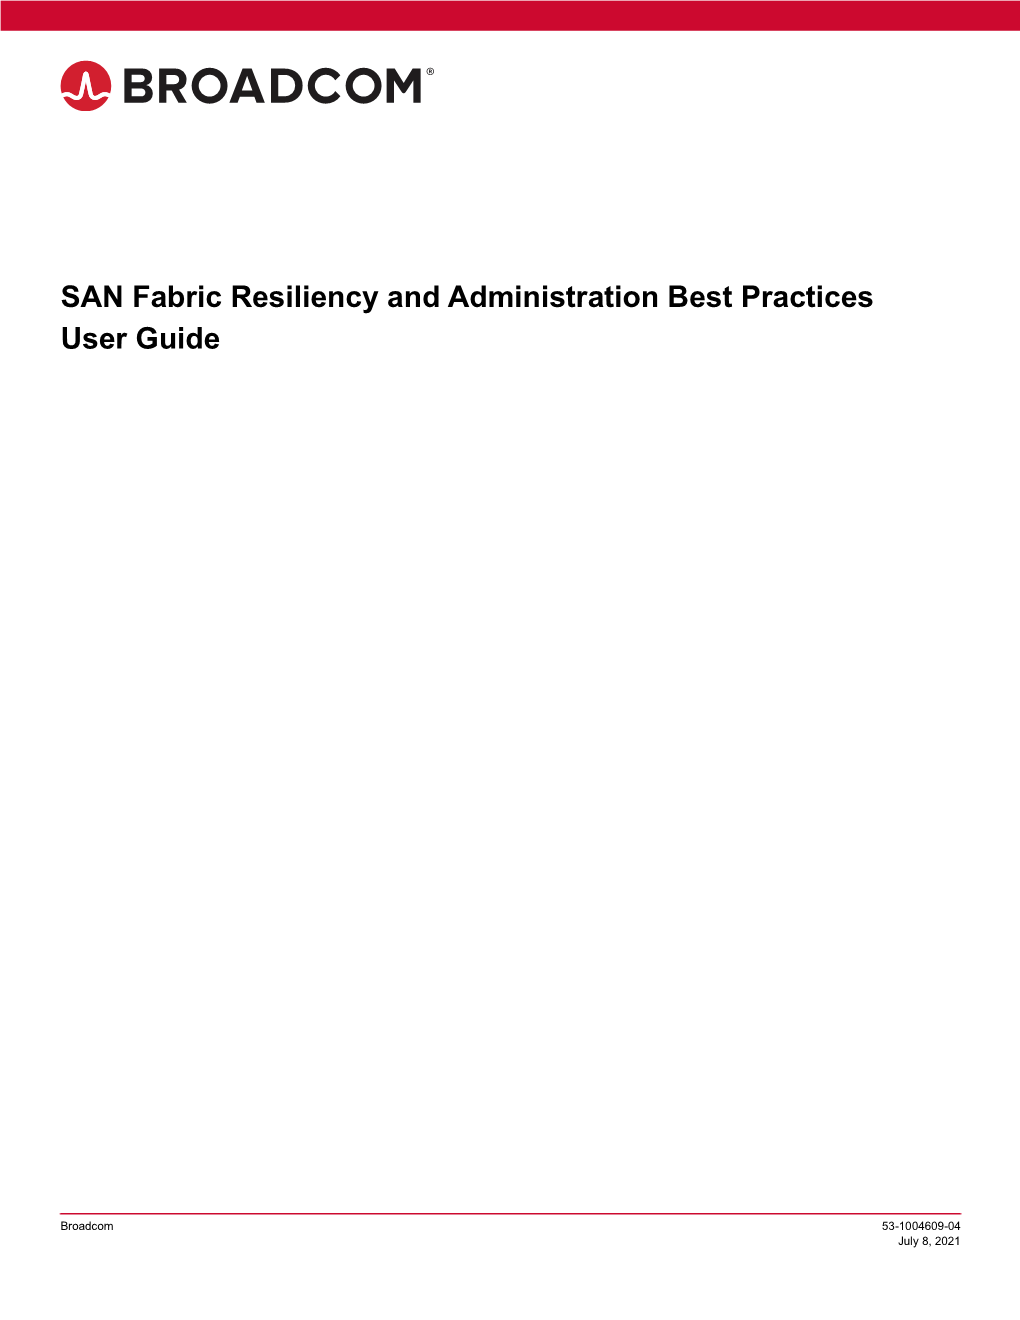 SAN Fabric Resiliency and Administration Best Practices User Guide